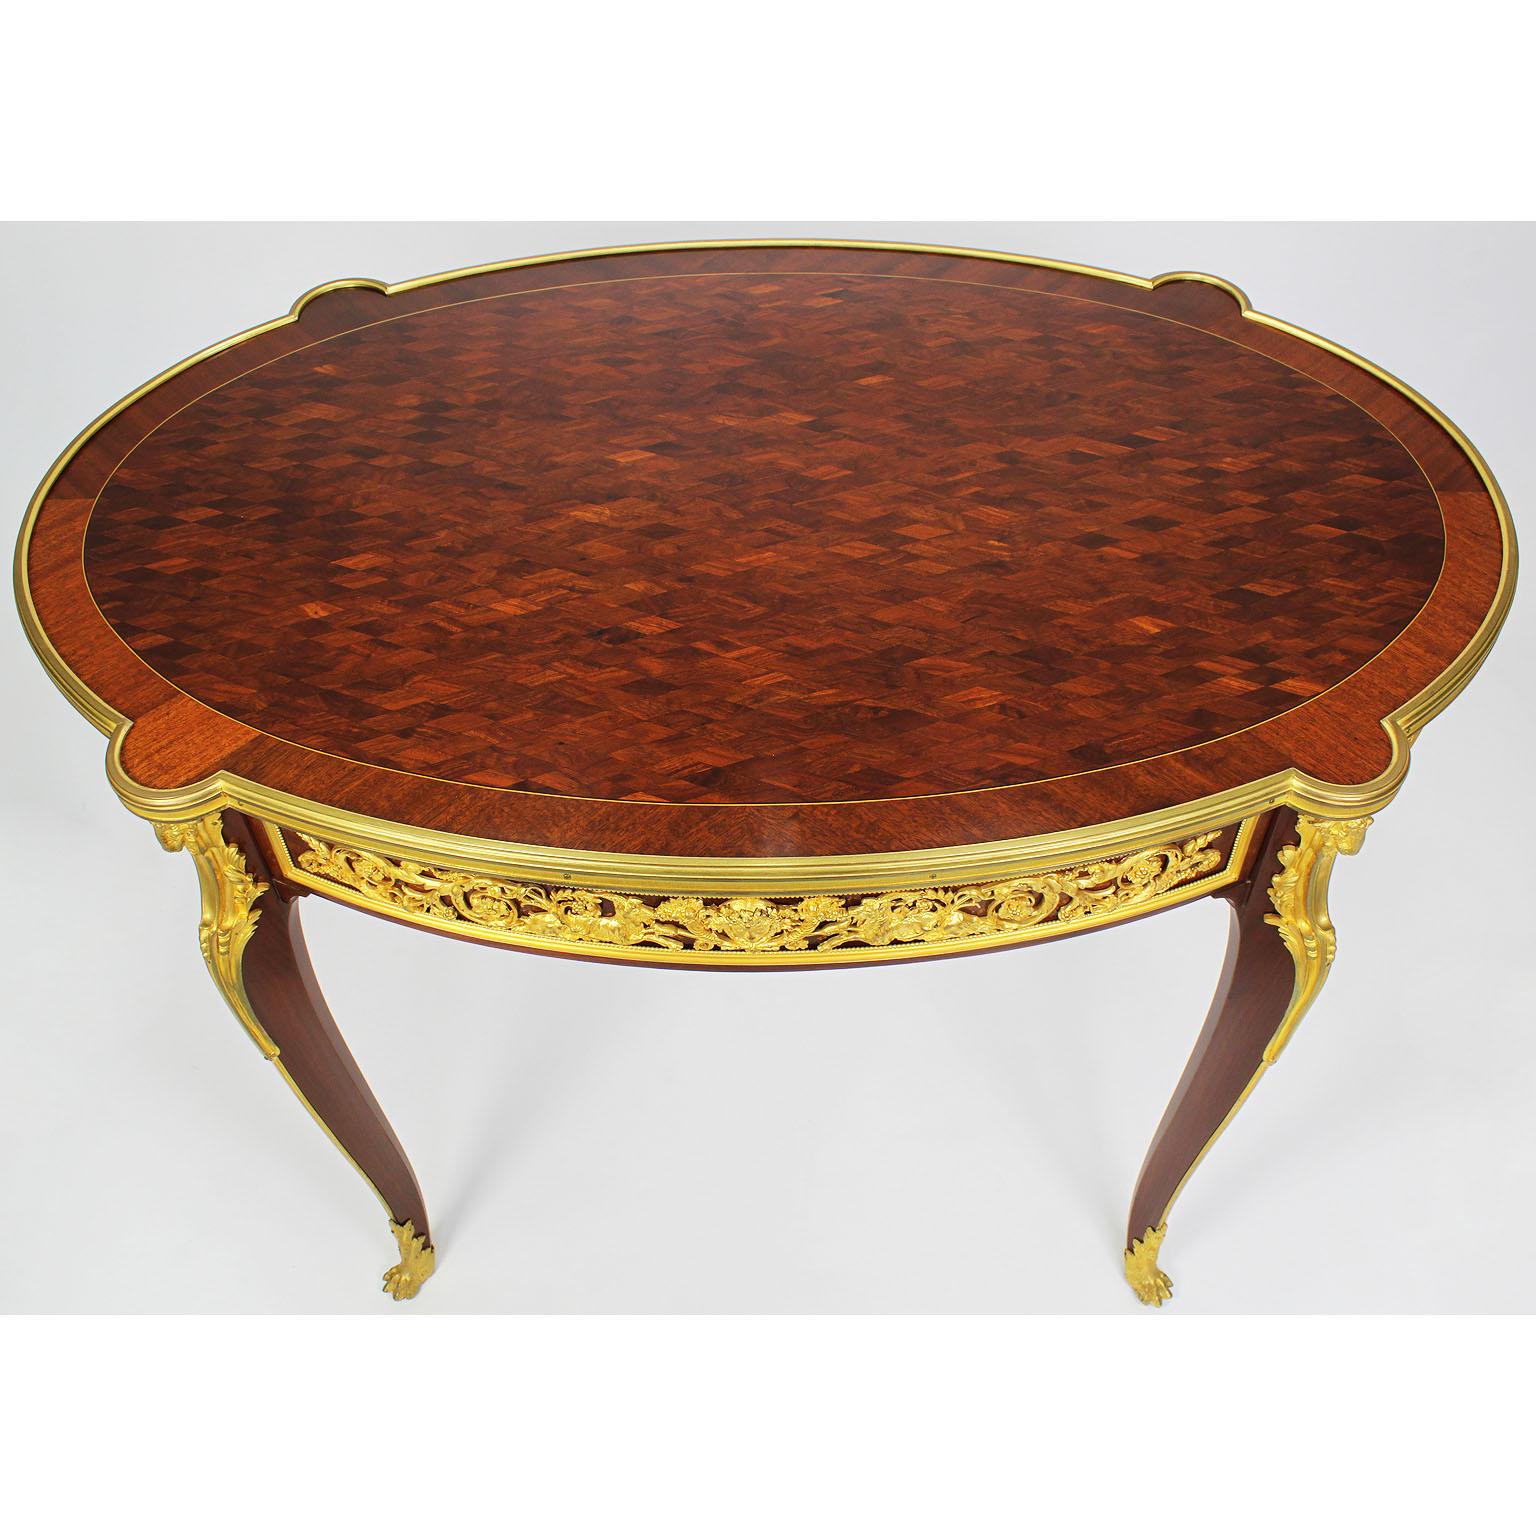 19th-20th Century Louis XV Gilt Bronze-Mounted Table, Francois Linke Attributed In Good Condition For Sale In Los Angeles, CA